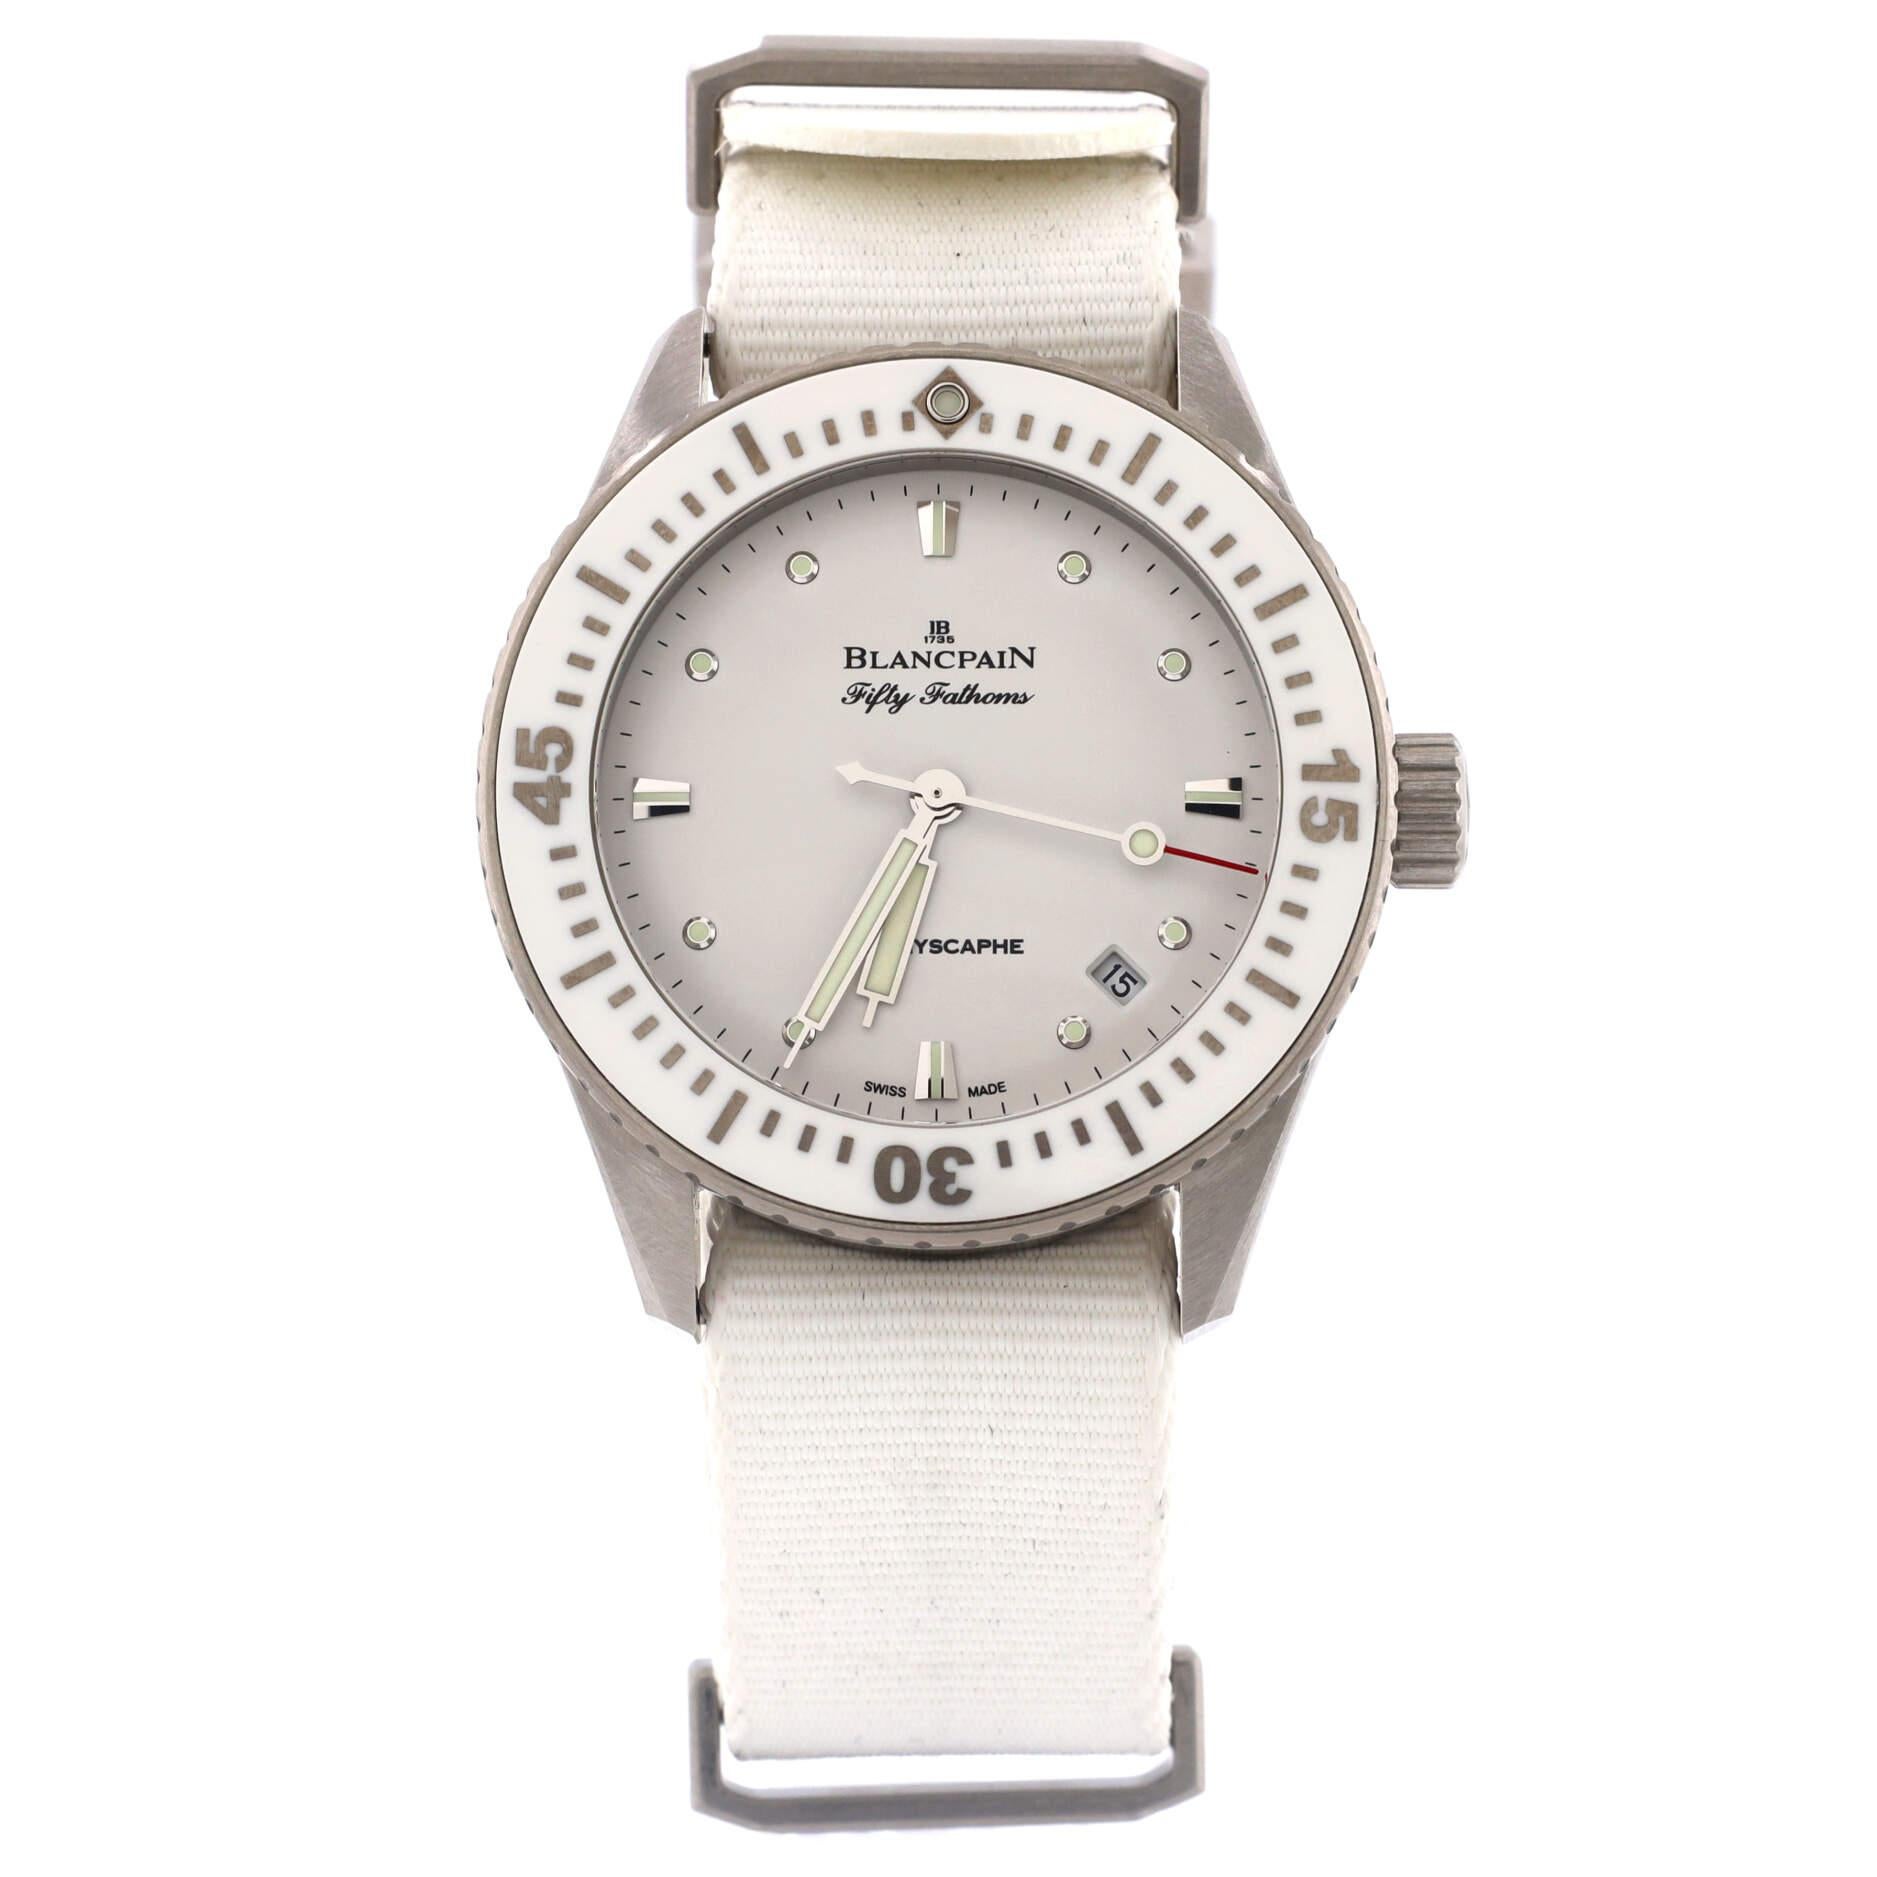 Condition: Excellent. Minimal wear throughout case and strap
Accessories: No Accessories
Measurements: Case Size/Width: 38mm, Watch Height: 10mm, Band Width: 20mm, Wrist circumference: 7.25